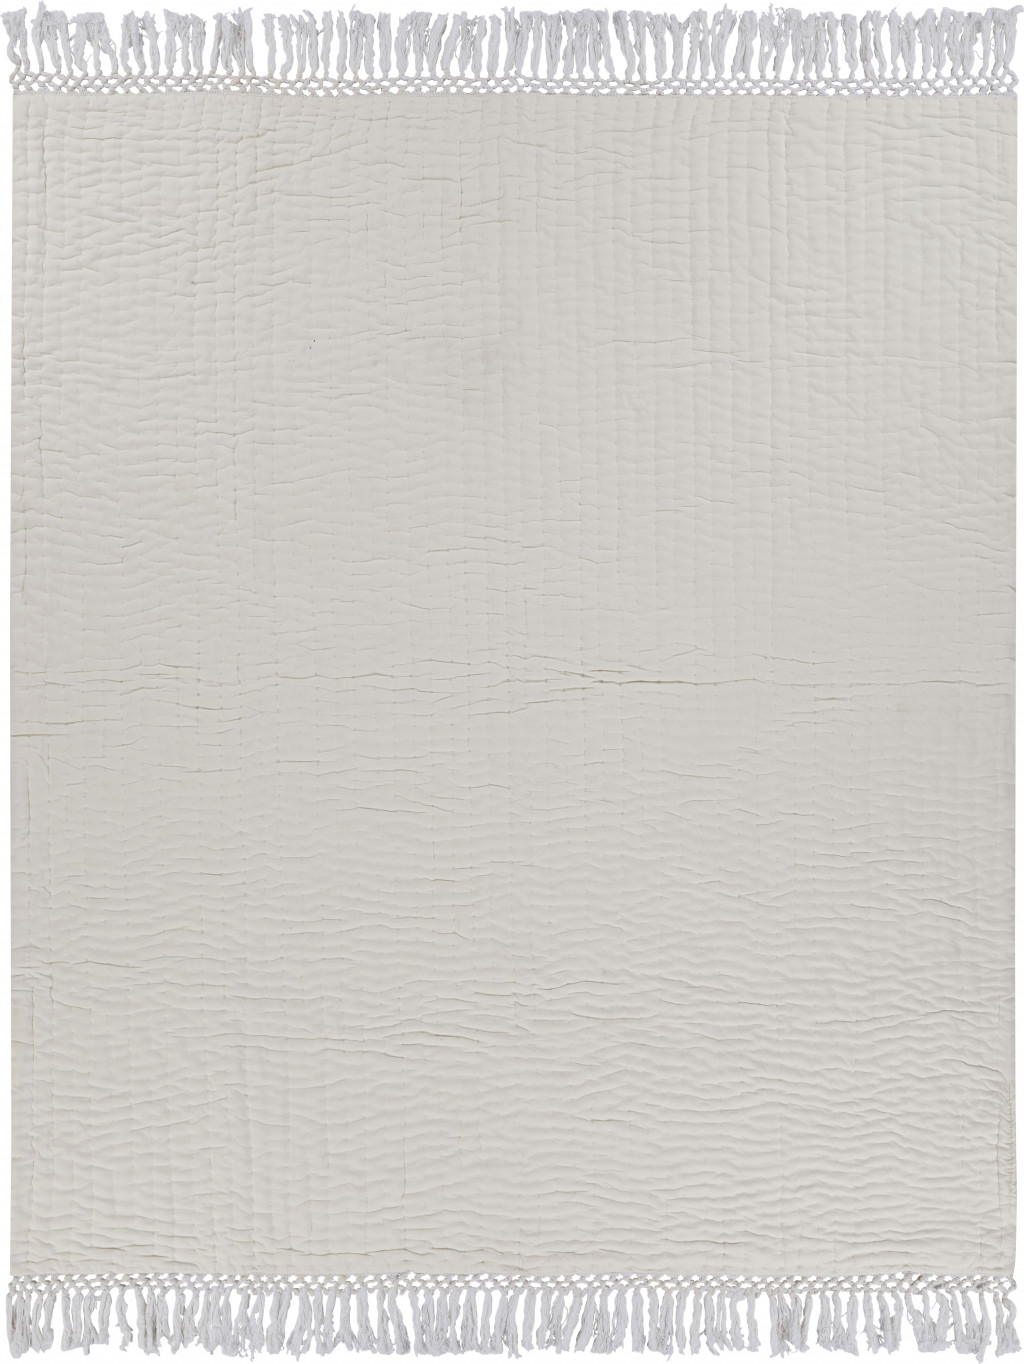 Cream Woven Cotton Solid Color Throw Blanket-516593-1